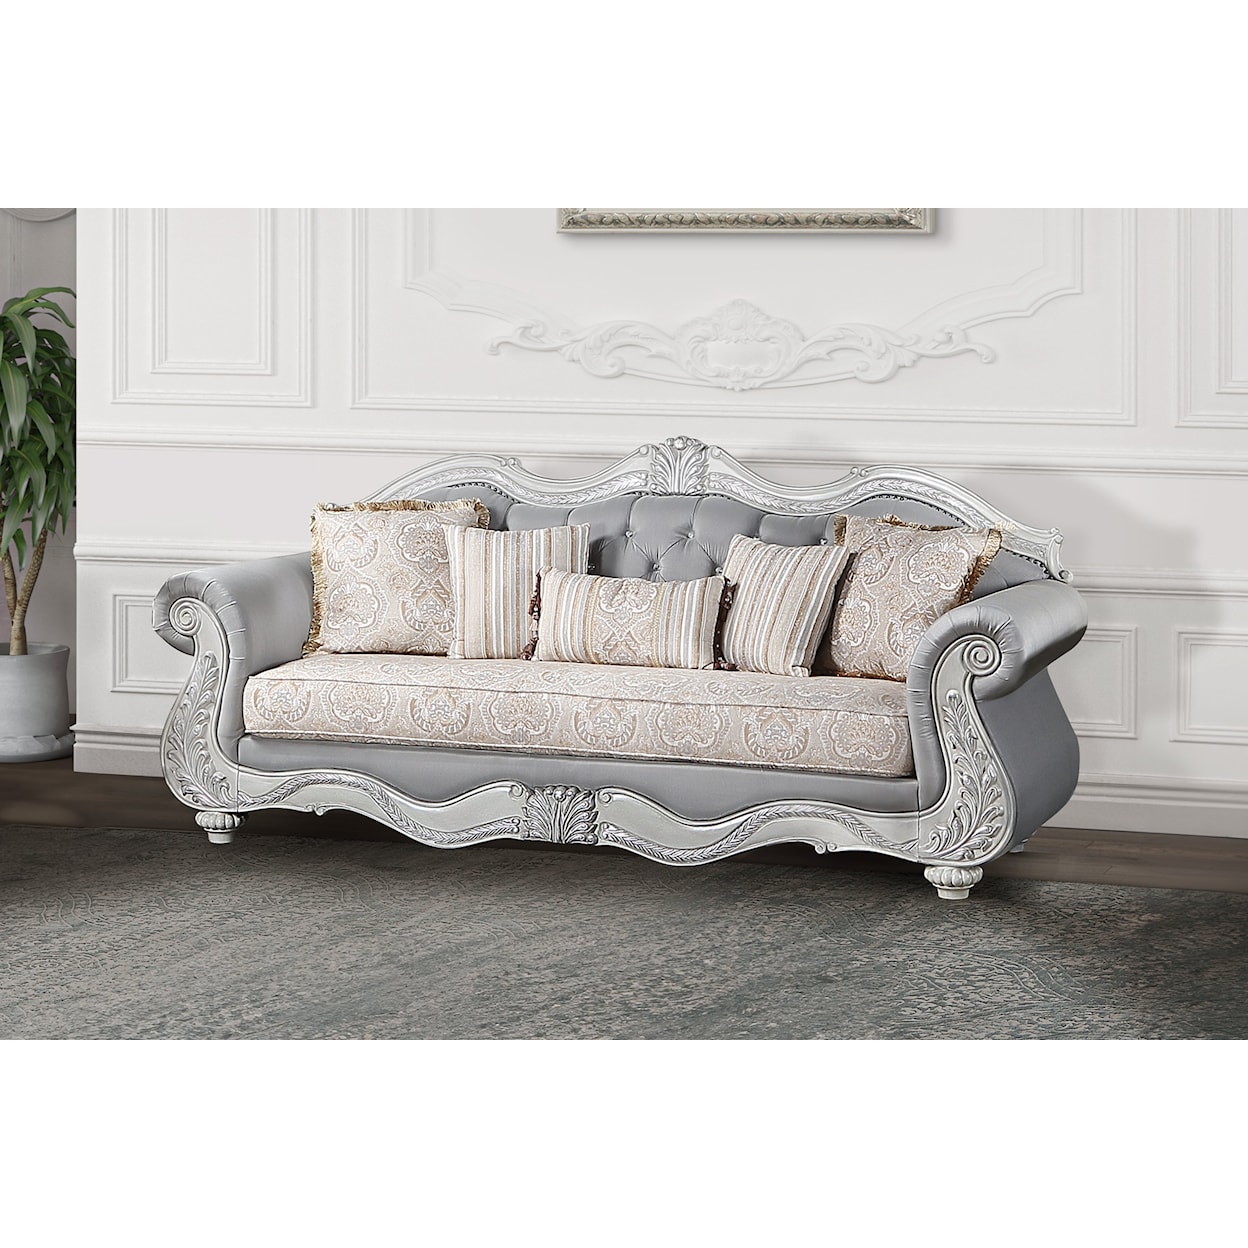 New Classic Cambria Hills Upholstered Sofa